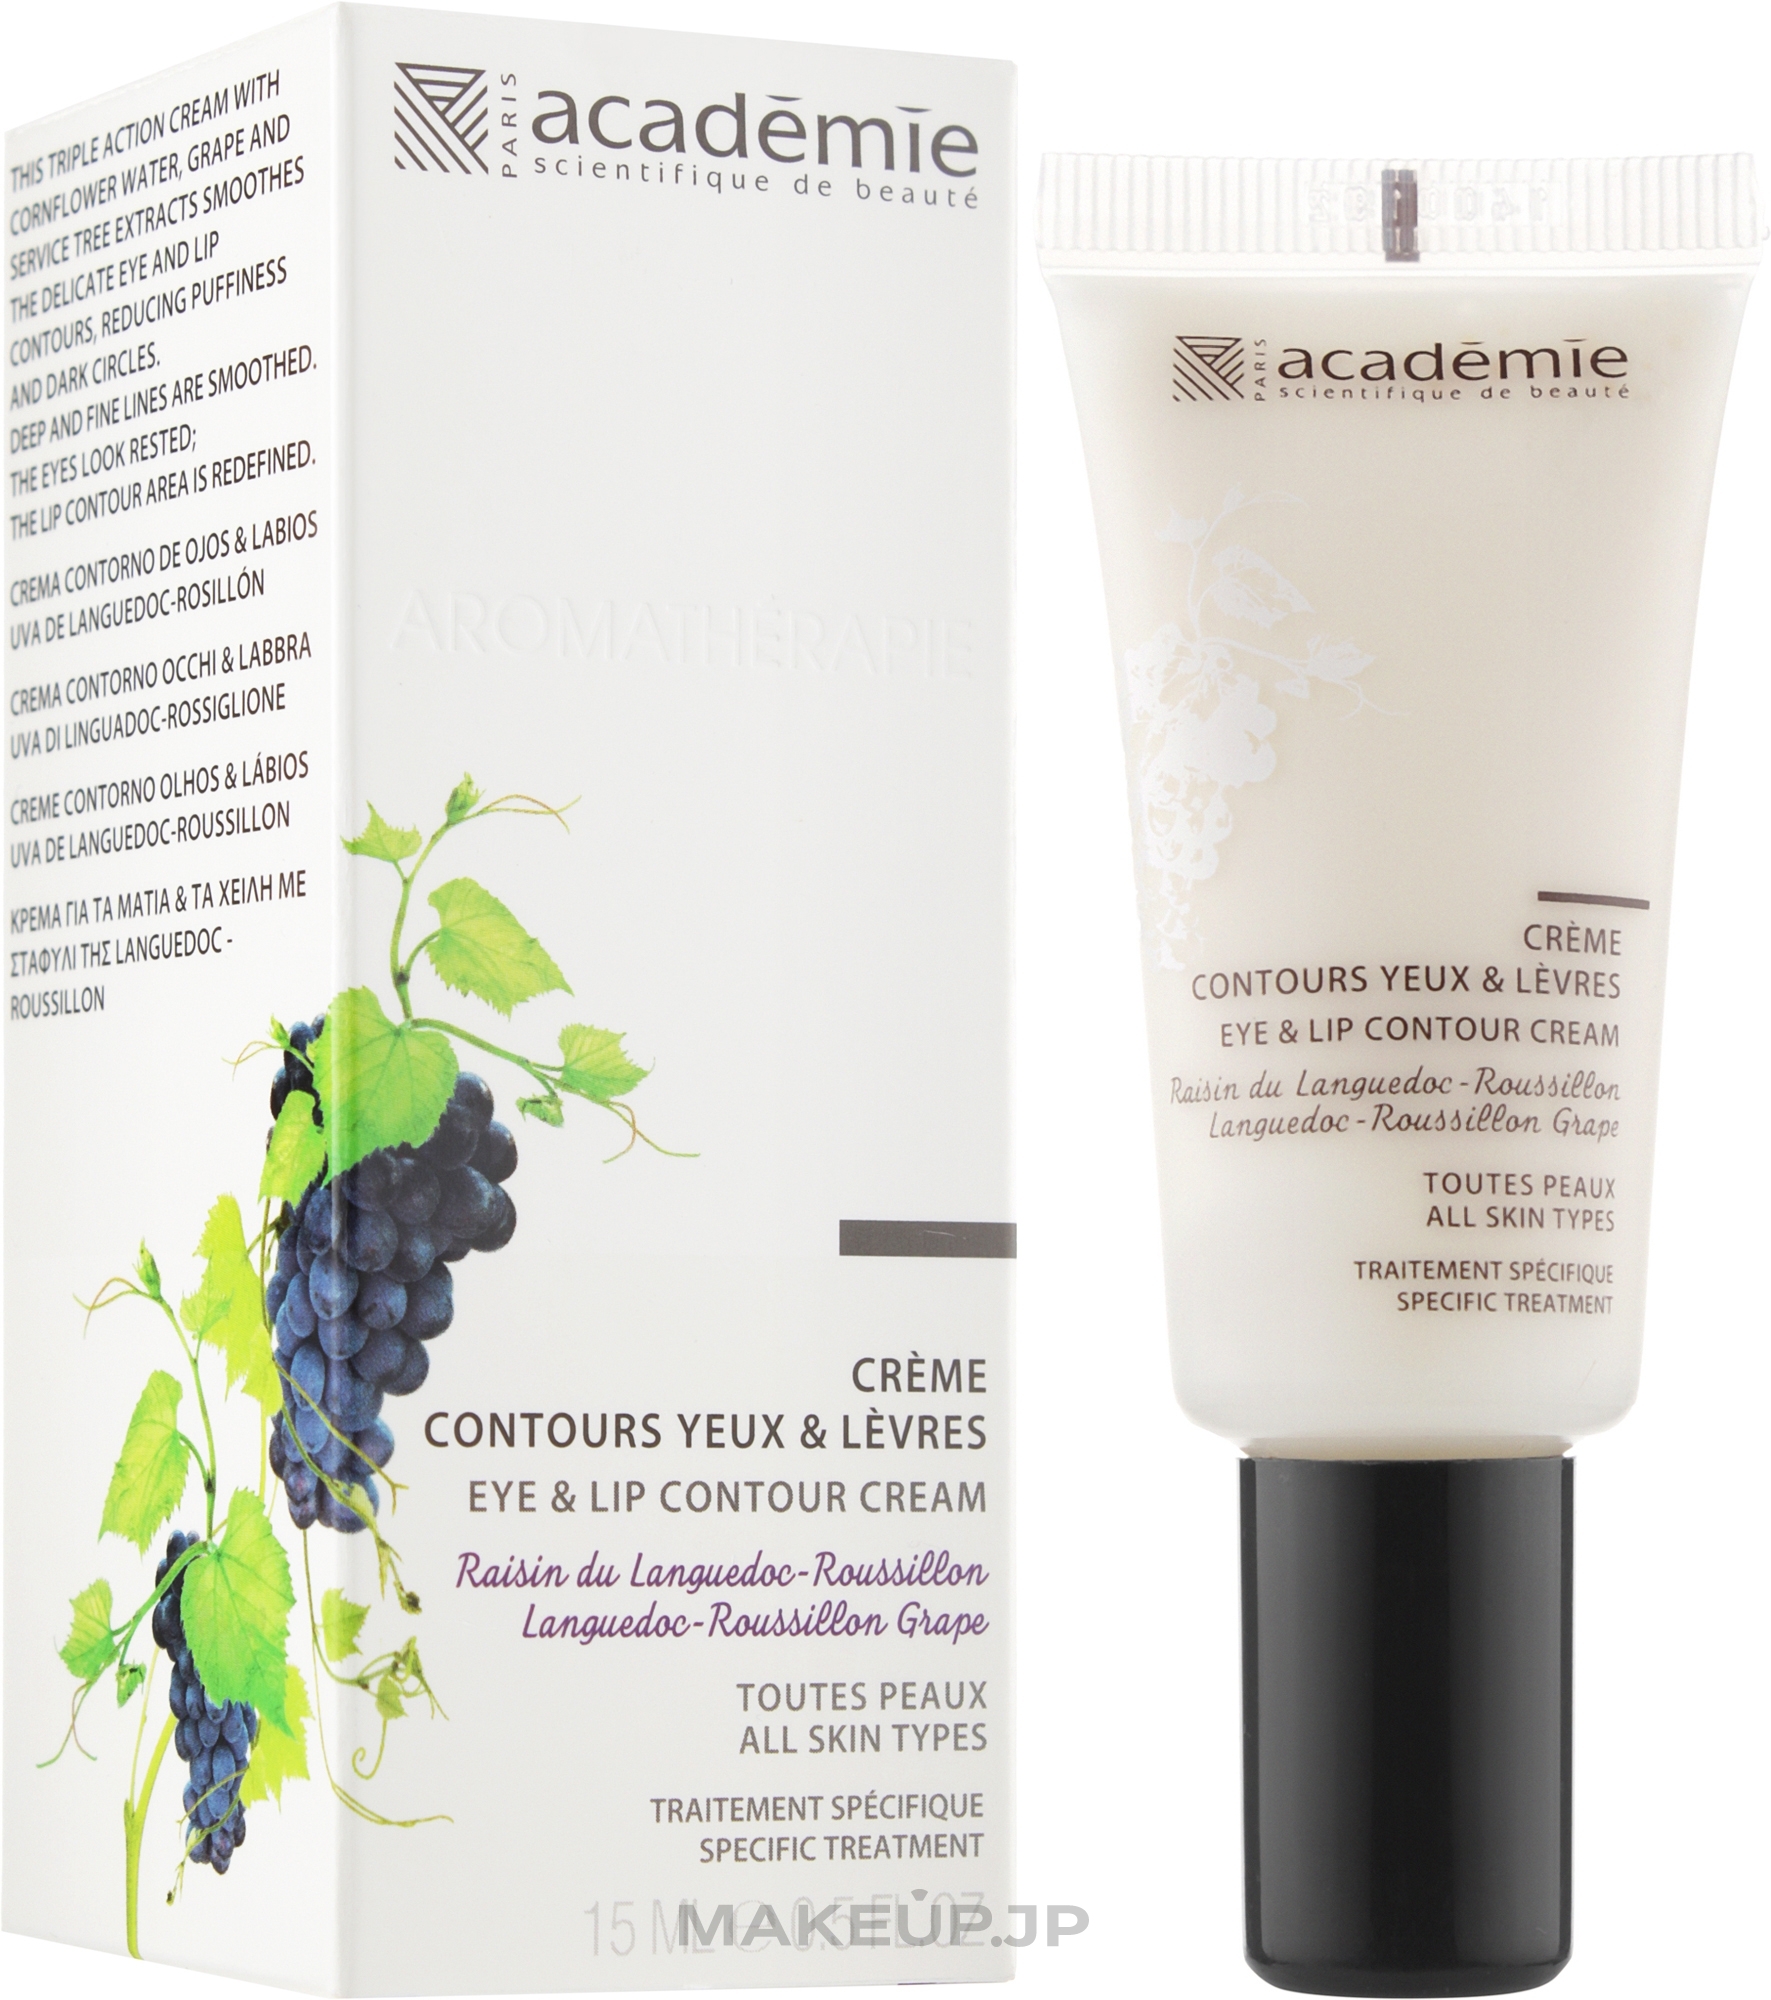 Eye & Lip Cream-Care "Grapes of the Languedoc-Roussillon Province" - Academie Creme coutours yeux & levres — photo 15 ml